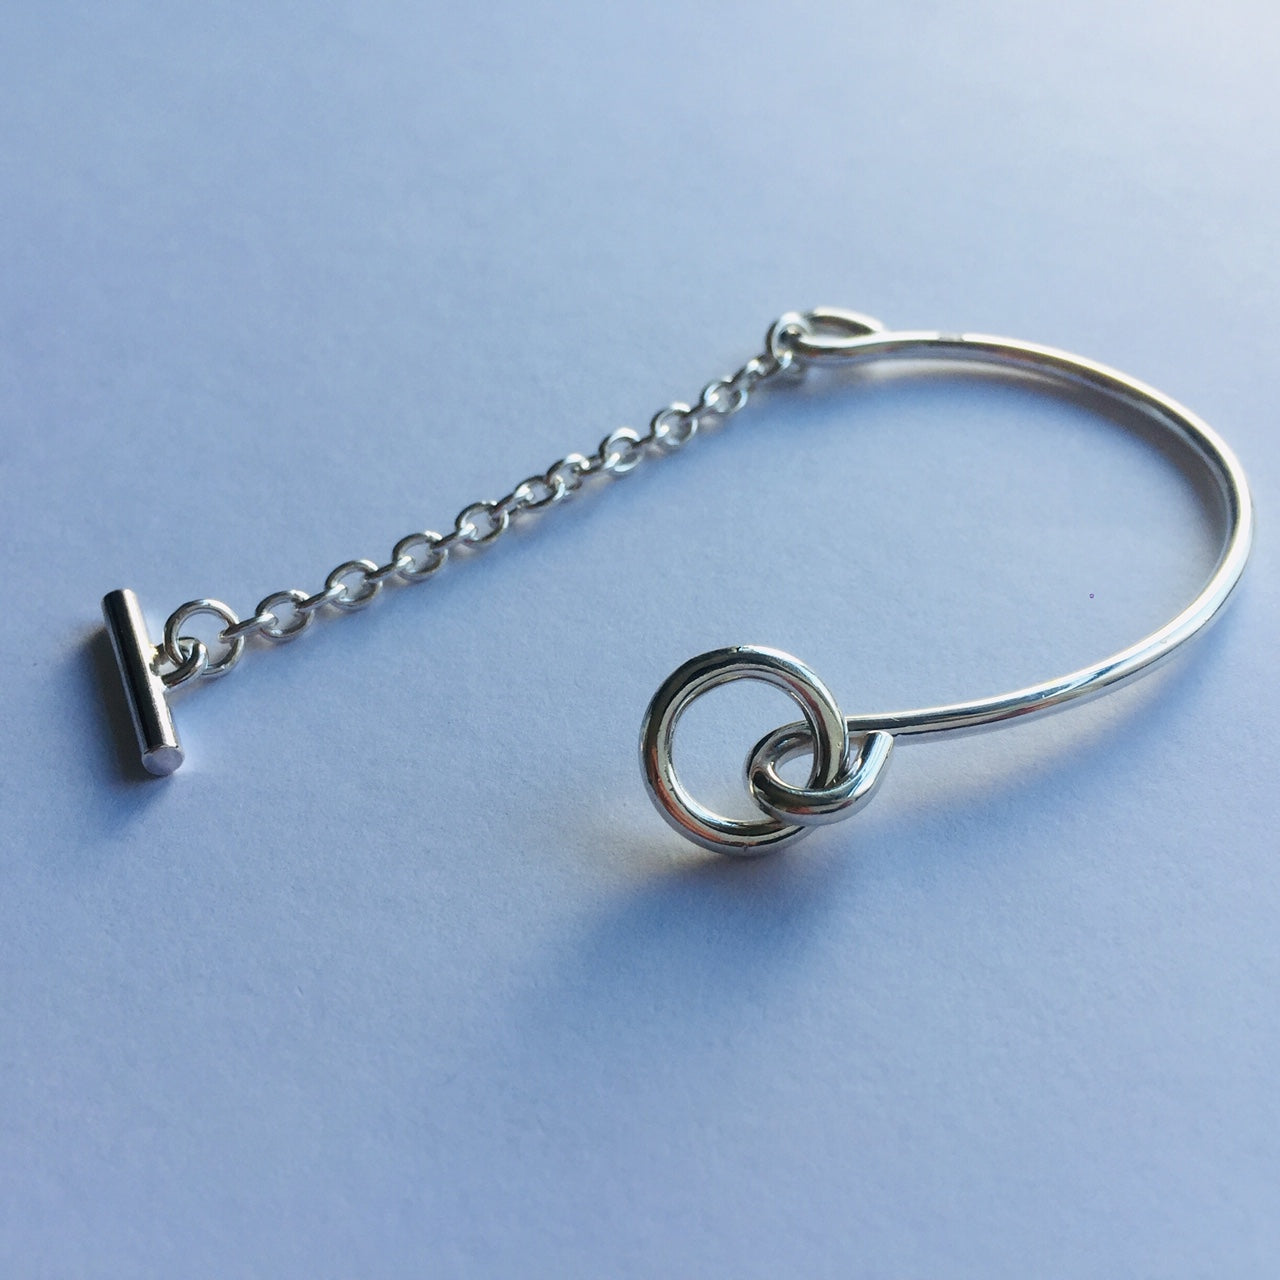 Sterling Silver925 Unique Curve & Chain Bracelet with Mantel ユニセックス・マンテル・シルバーブレスレット